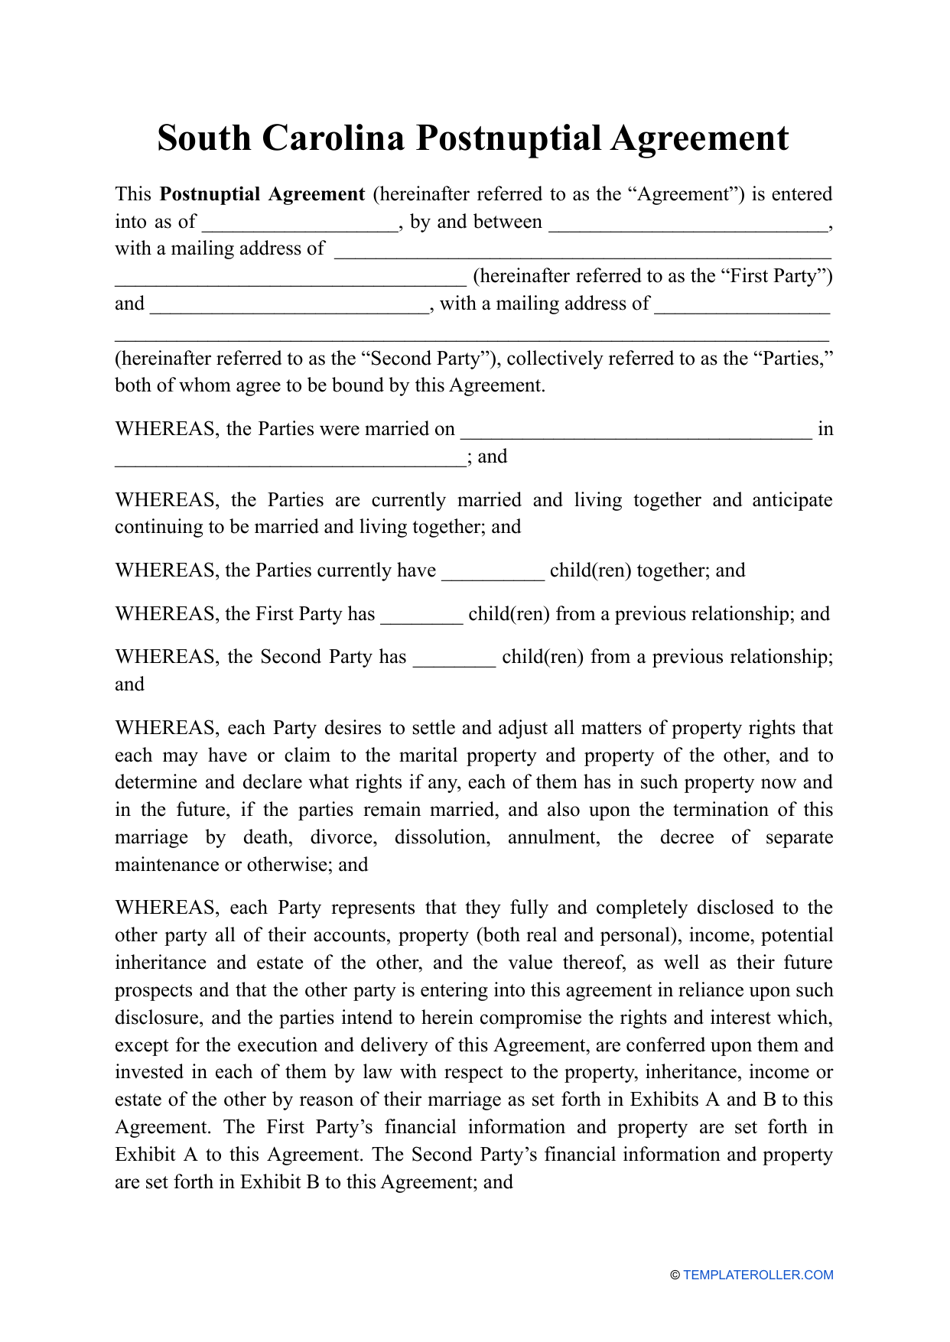 Postnuptial Agreement Template - South Carolina, Page 1